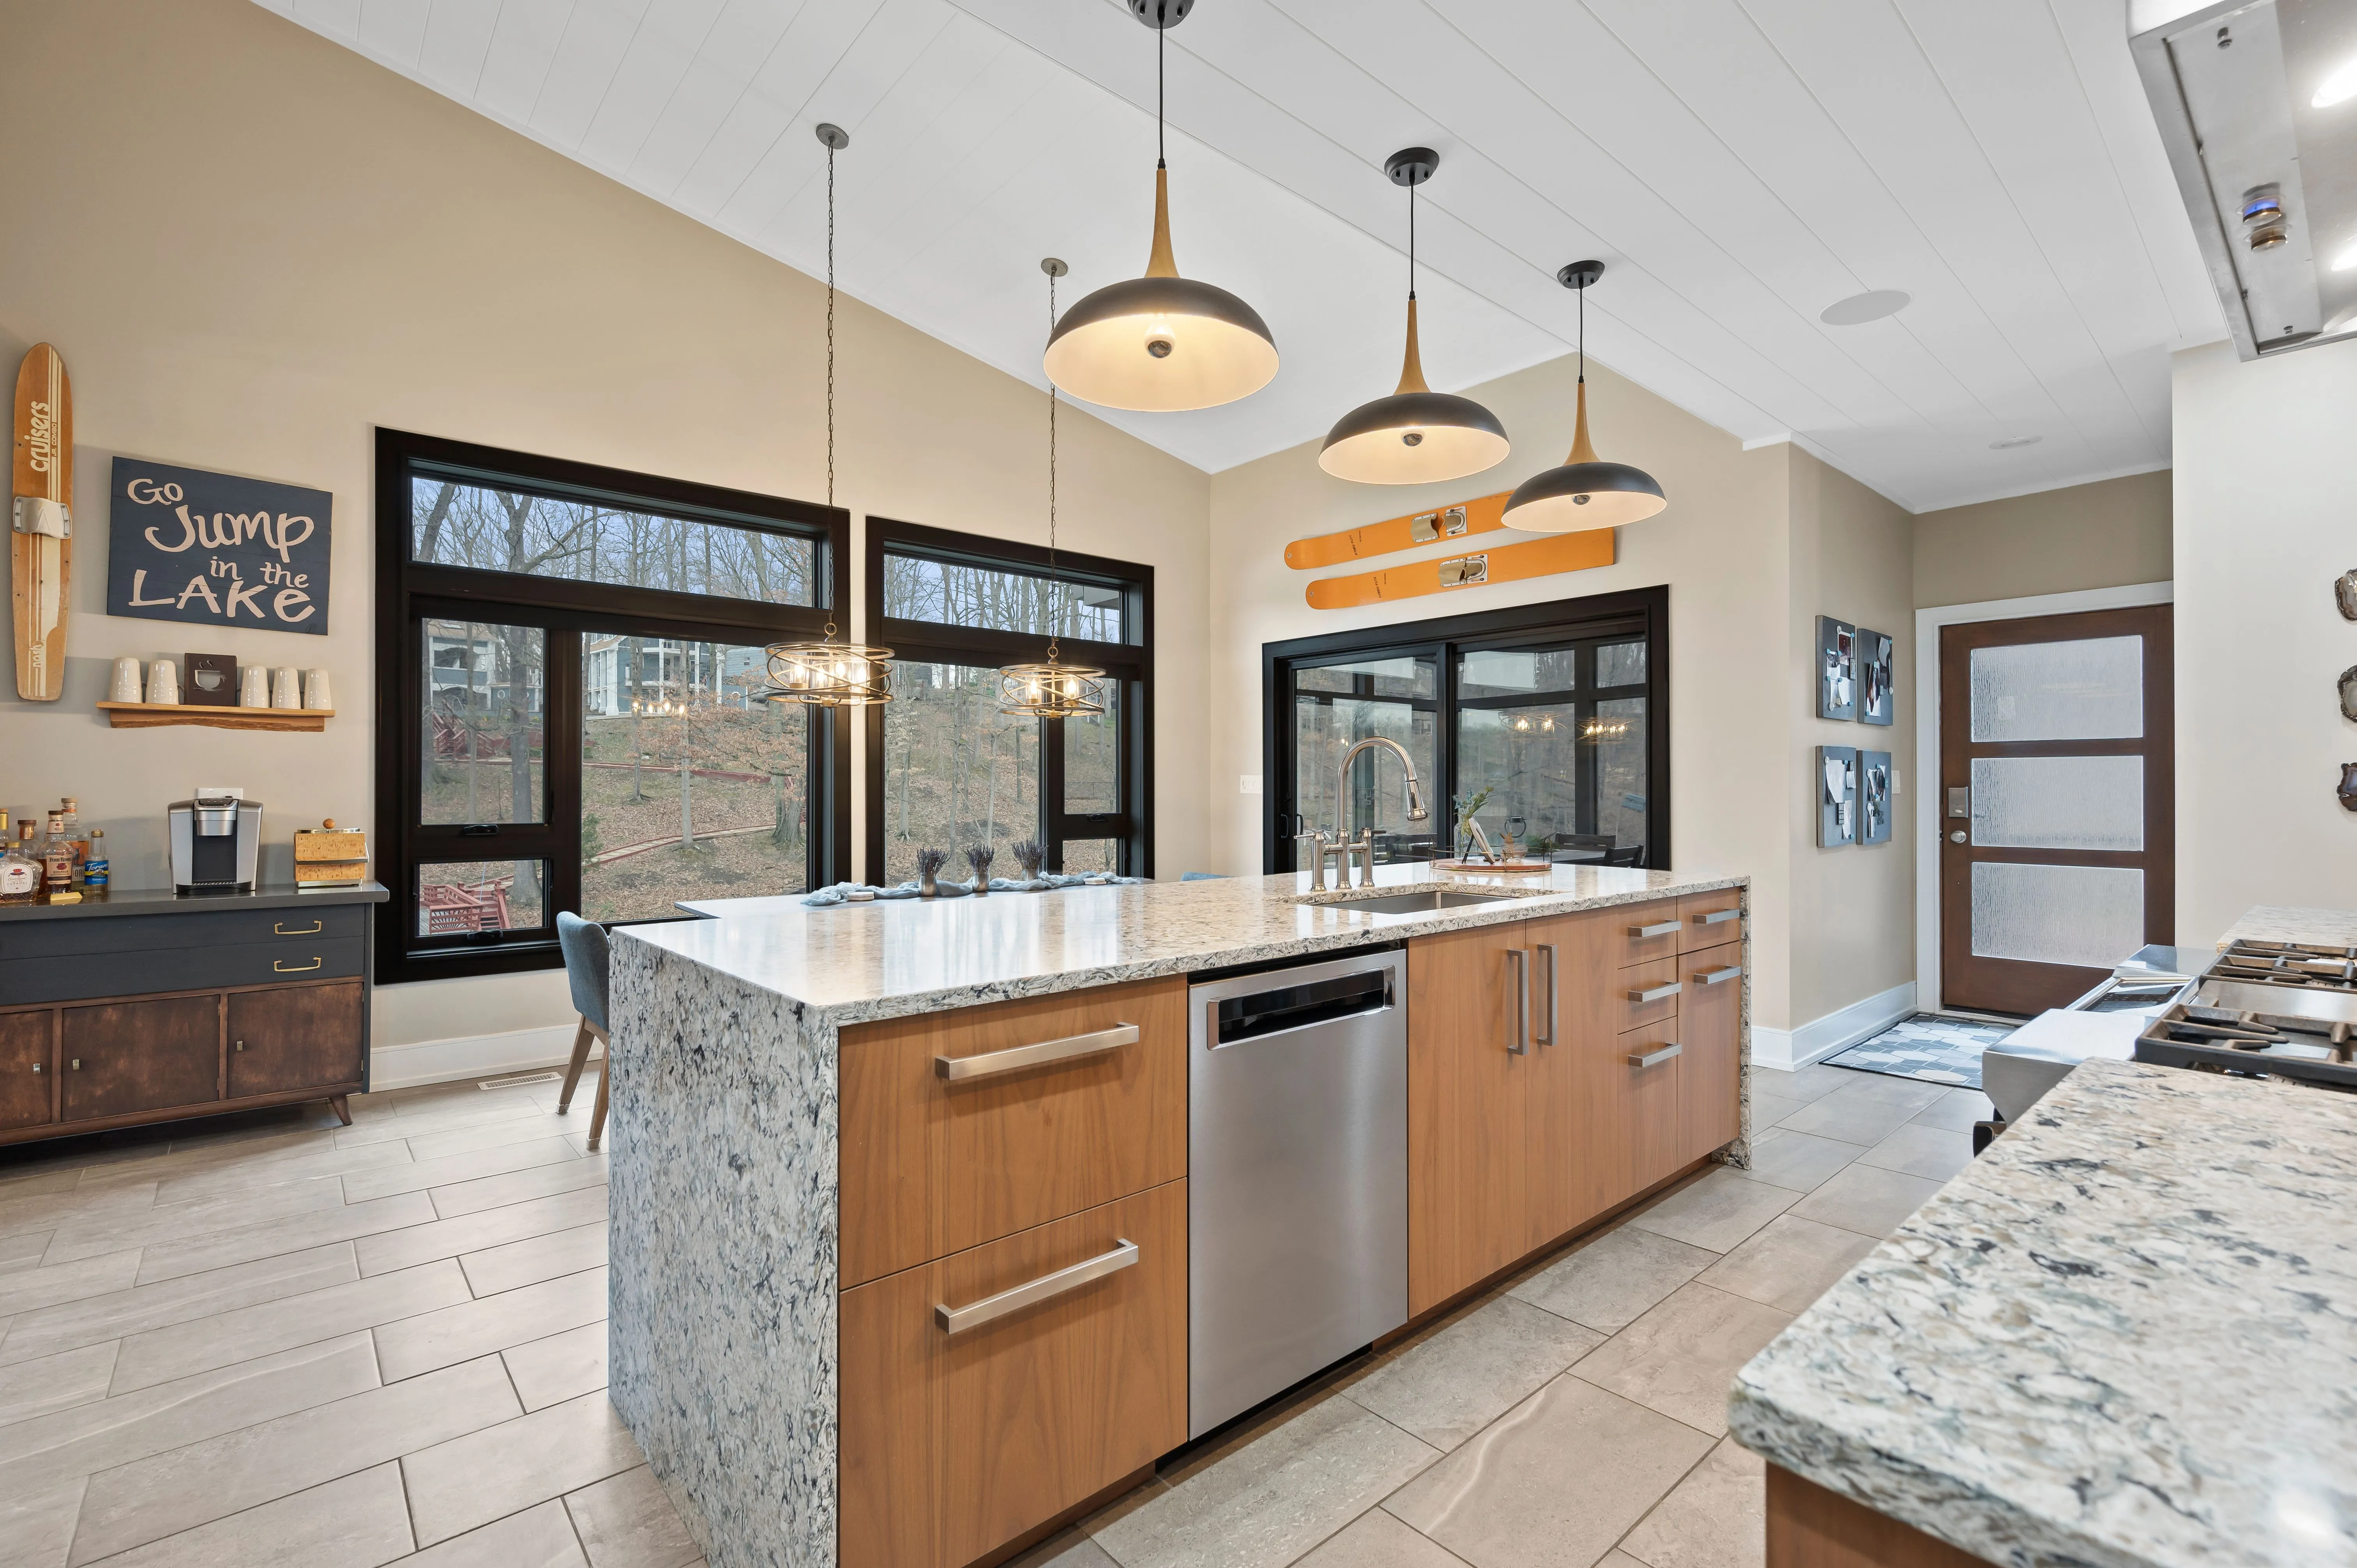 Modern kitchen interior with granite countertops, stainless steel appliances, and pendant lighting.